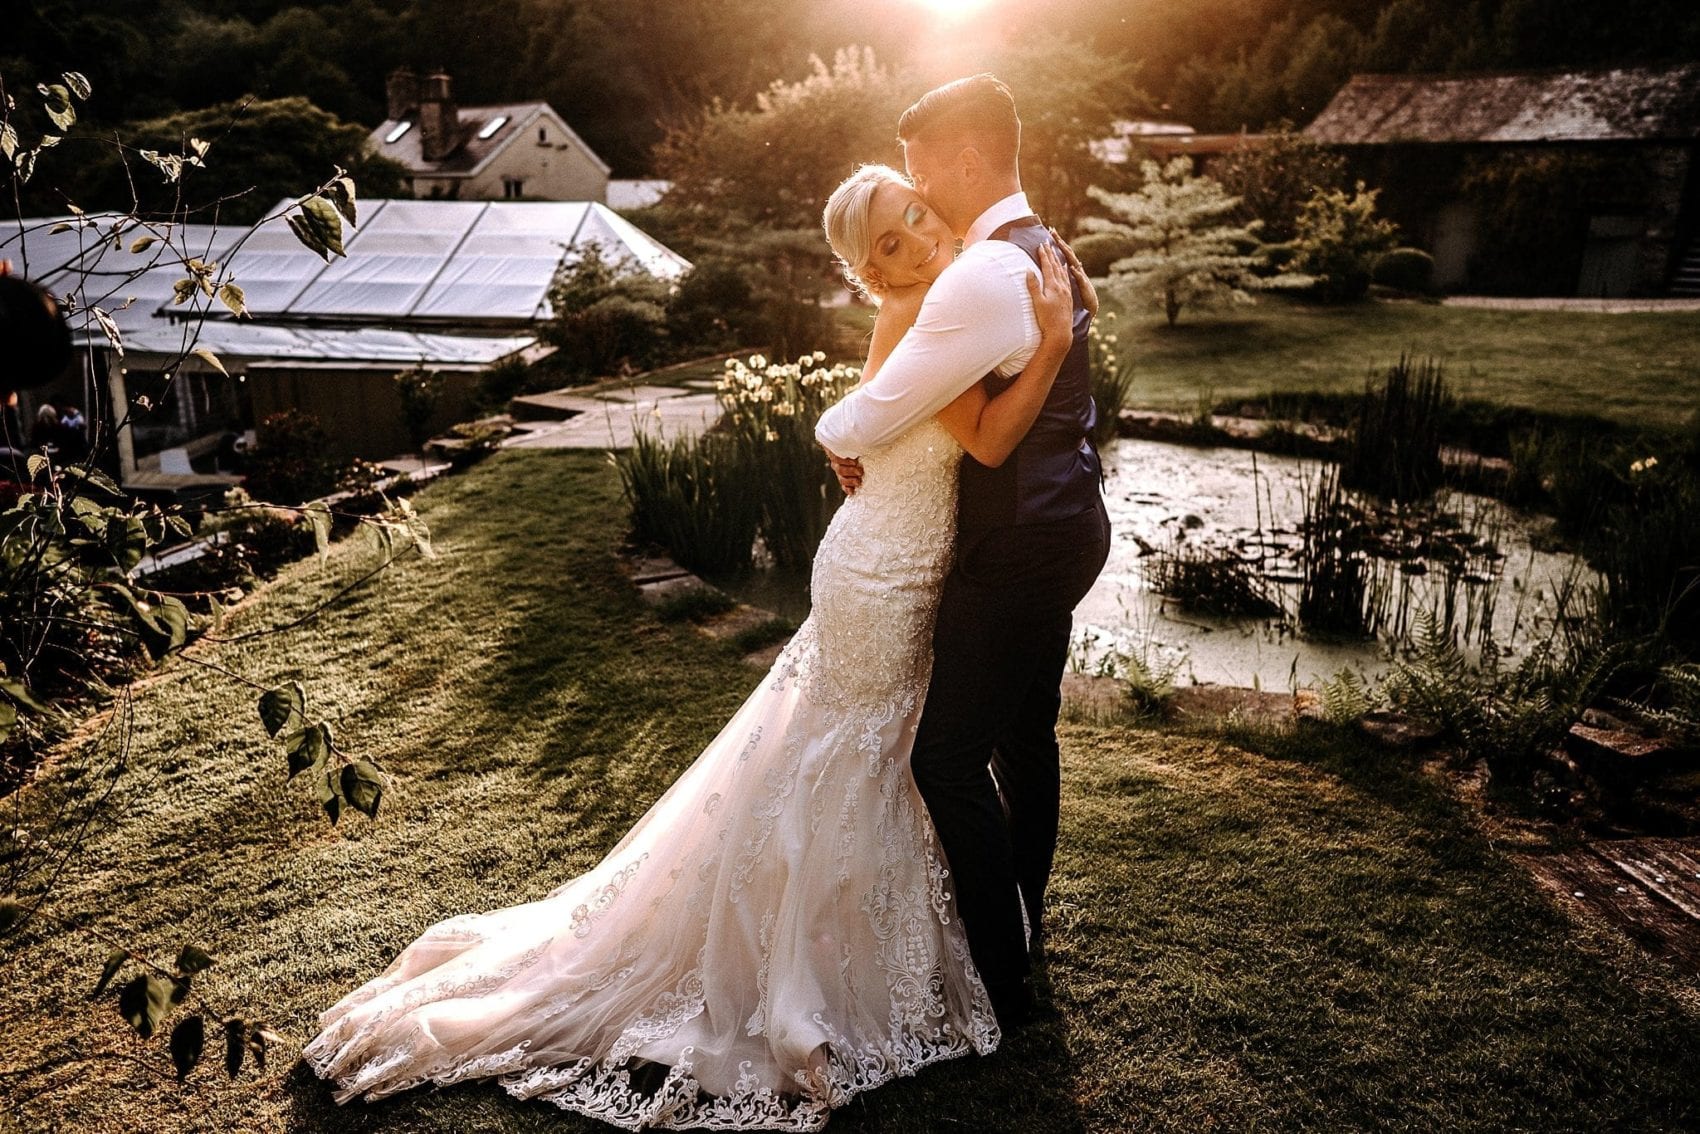 Bride and groom in the sunset